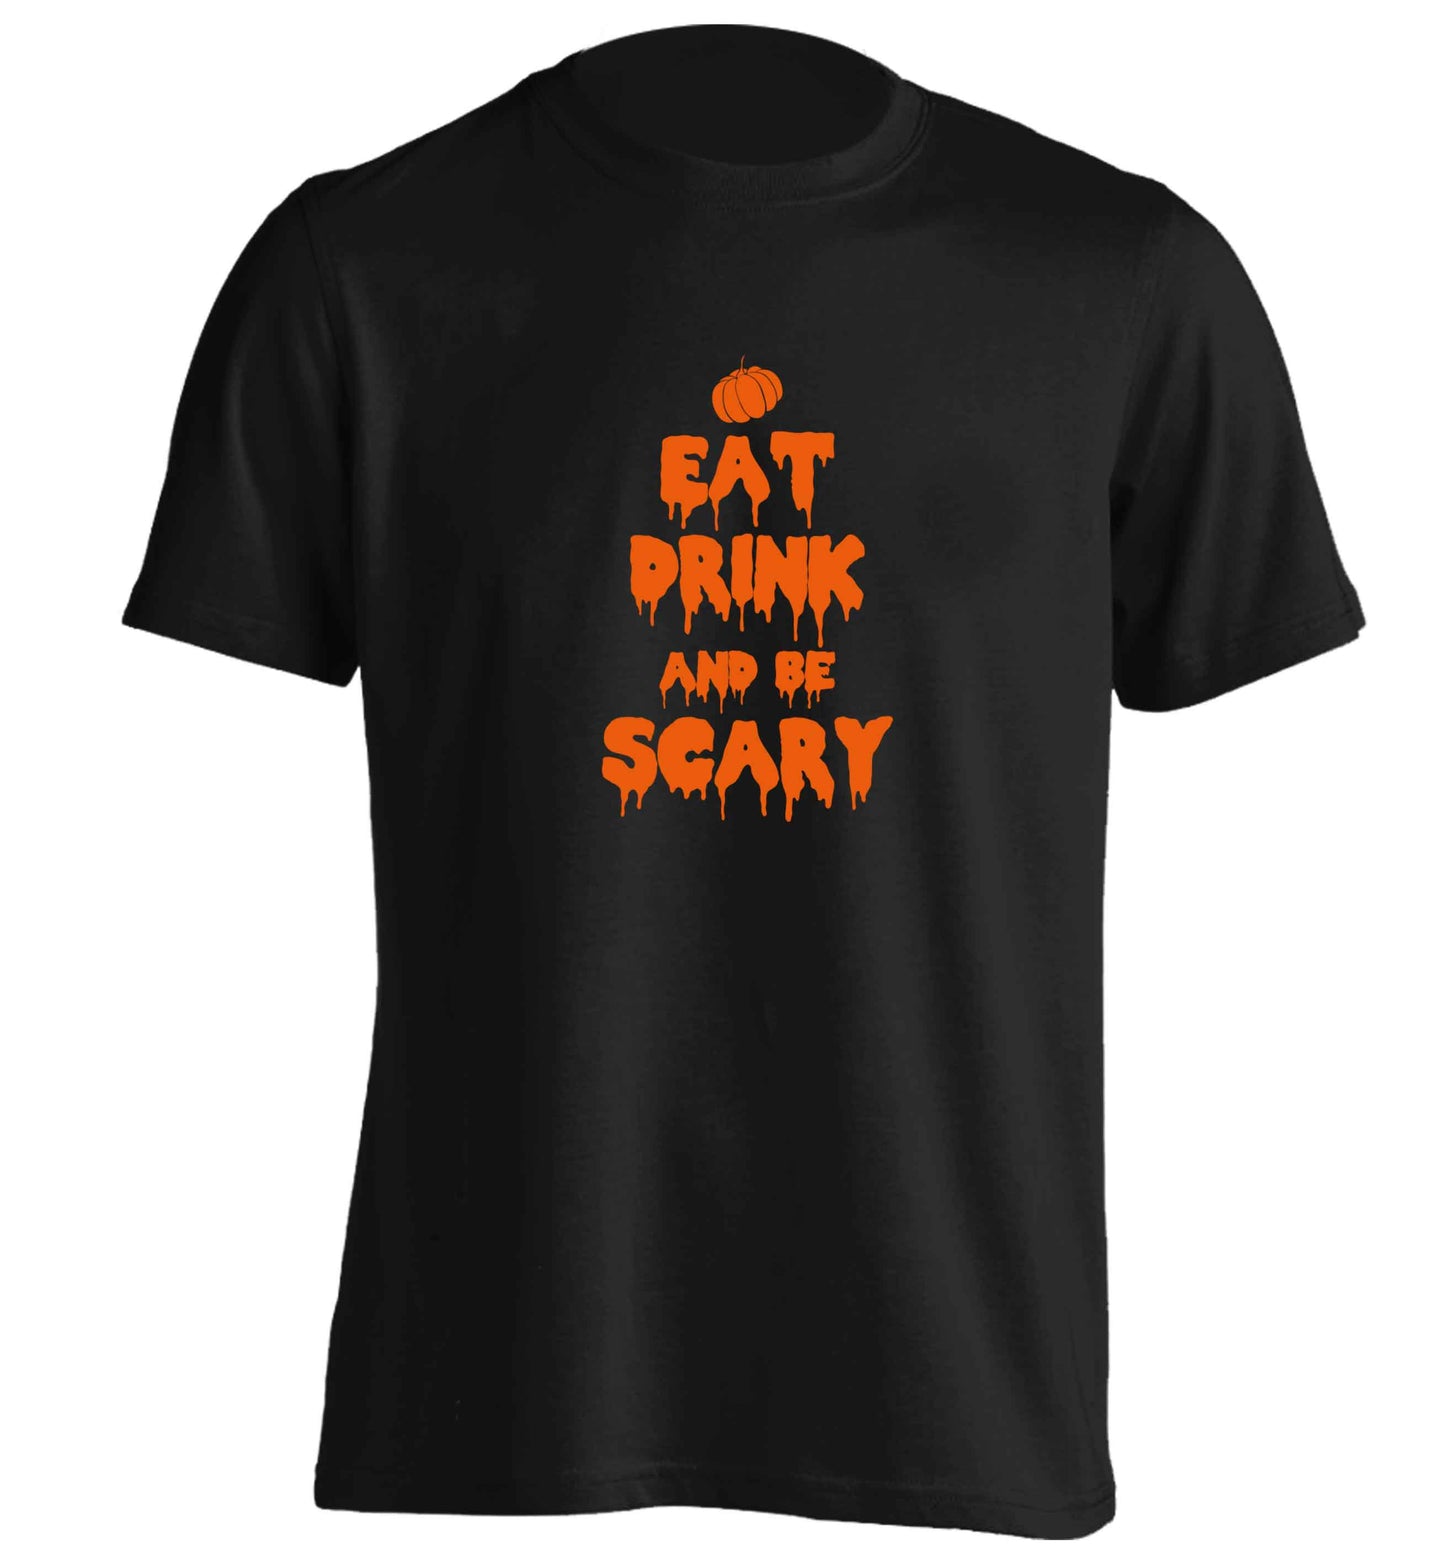 Eat drink and be scary adults unisex black Tshirt 2XL